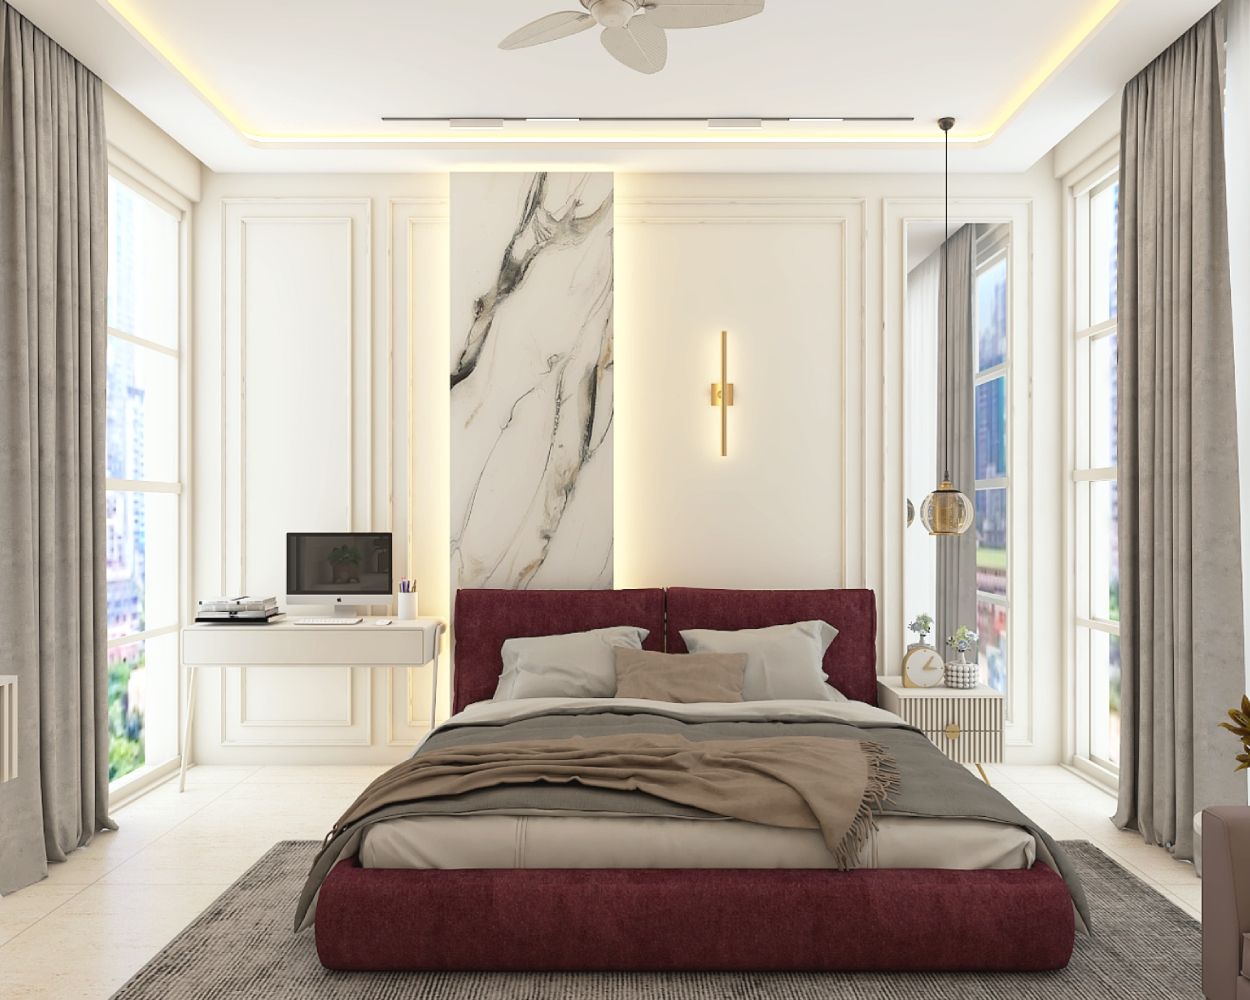 Contemporary White And Maroon Master Bedroom Design With Marble Wall Panel